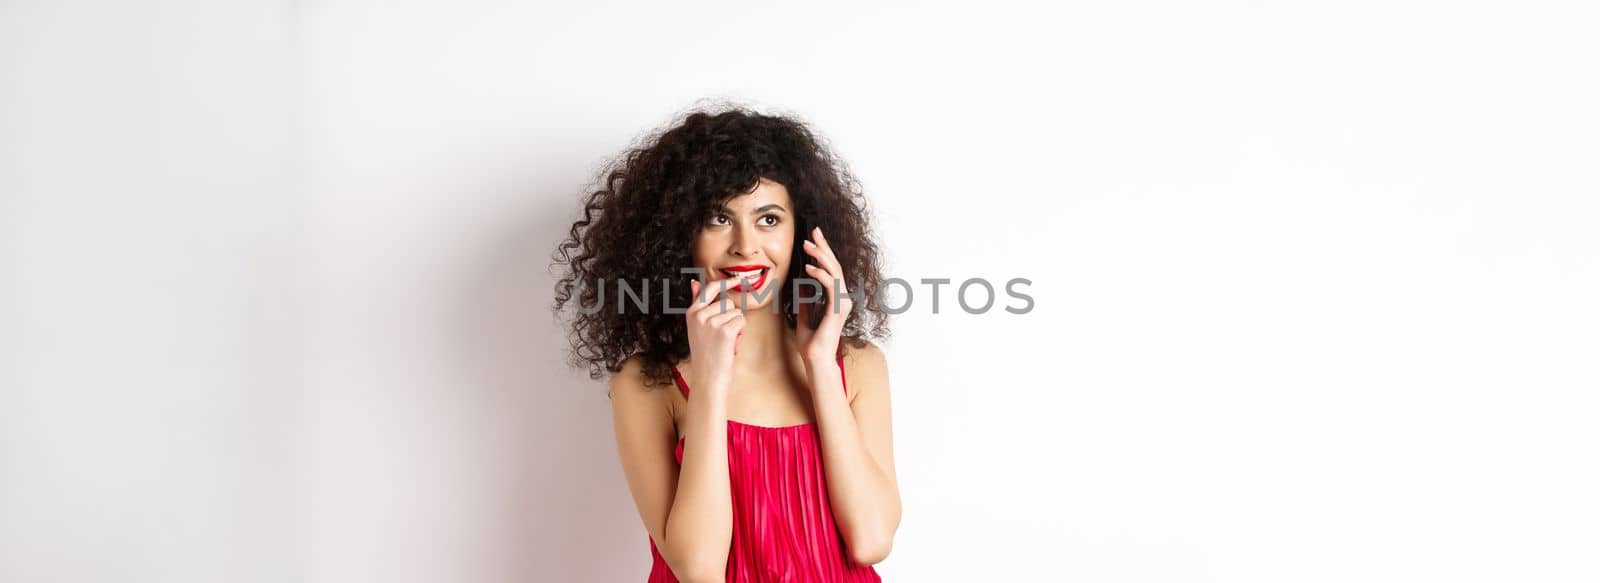 Silly fashionable woman in red dress and lips, biting fingernail duing phone call, thinking on mobile conversation, standing on white background.